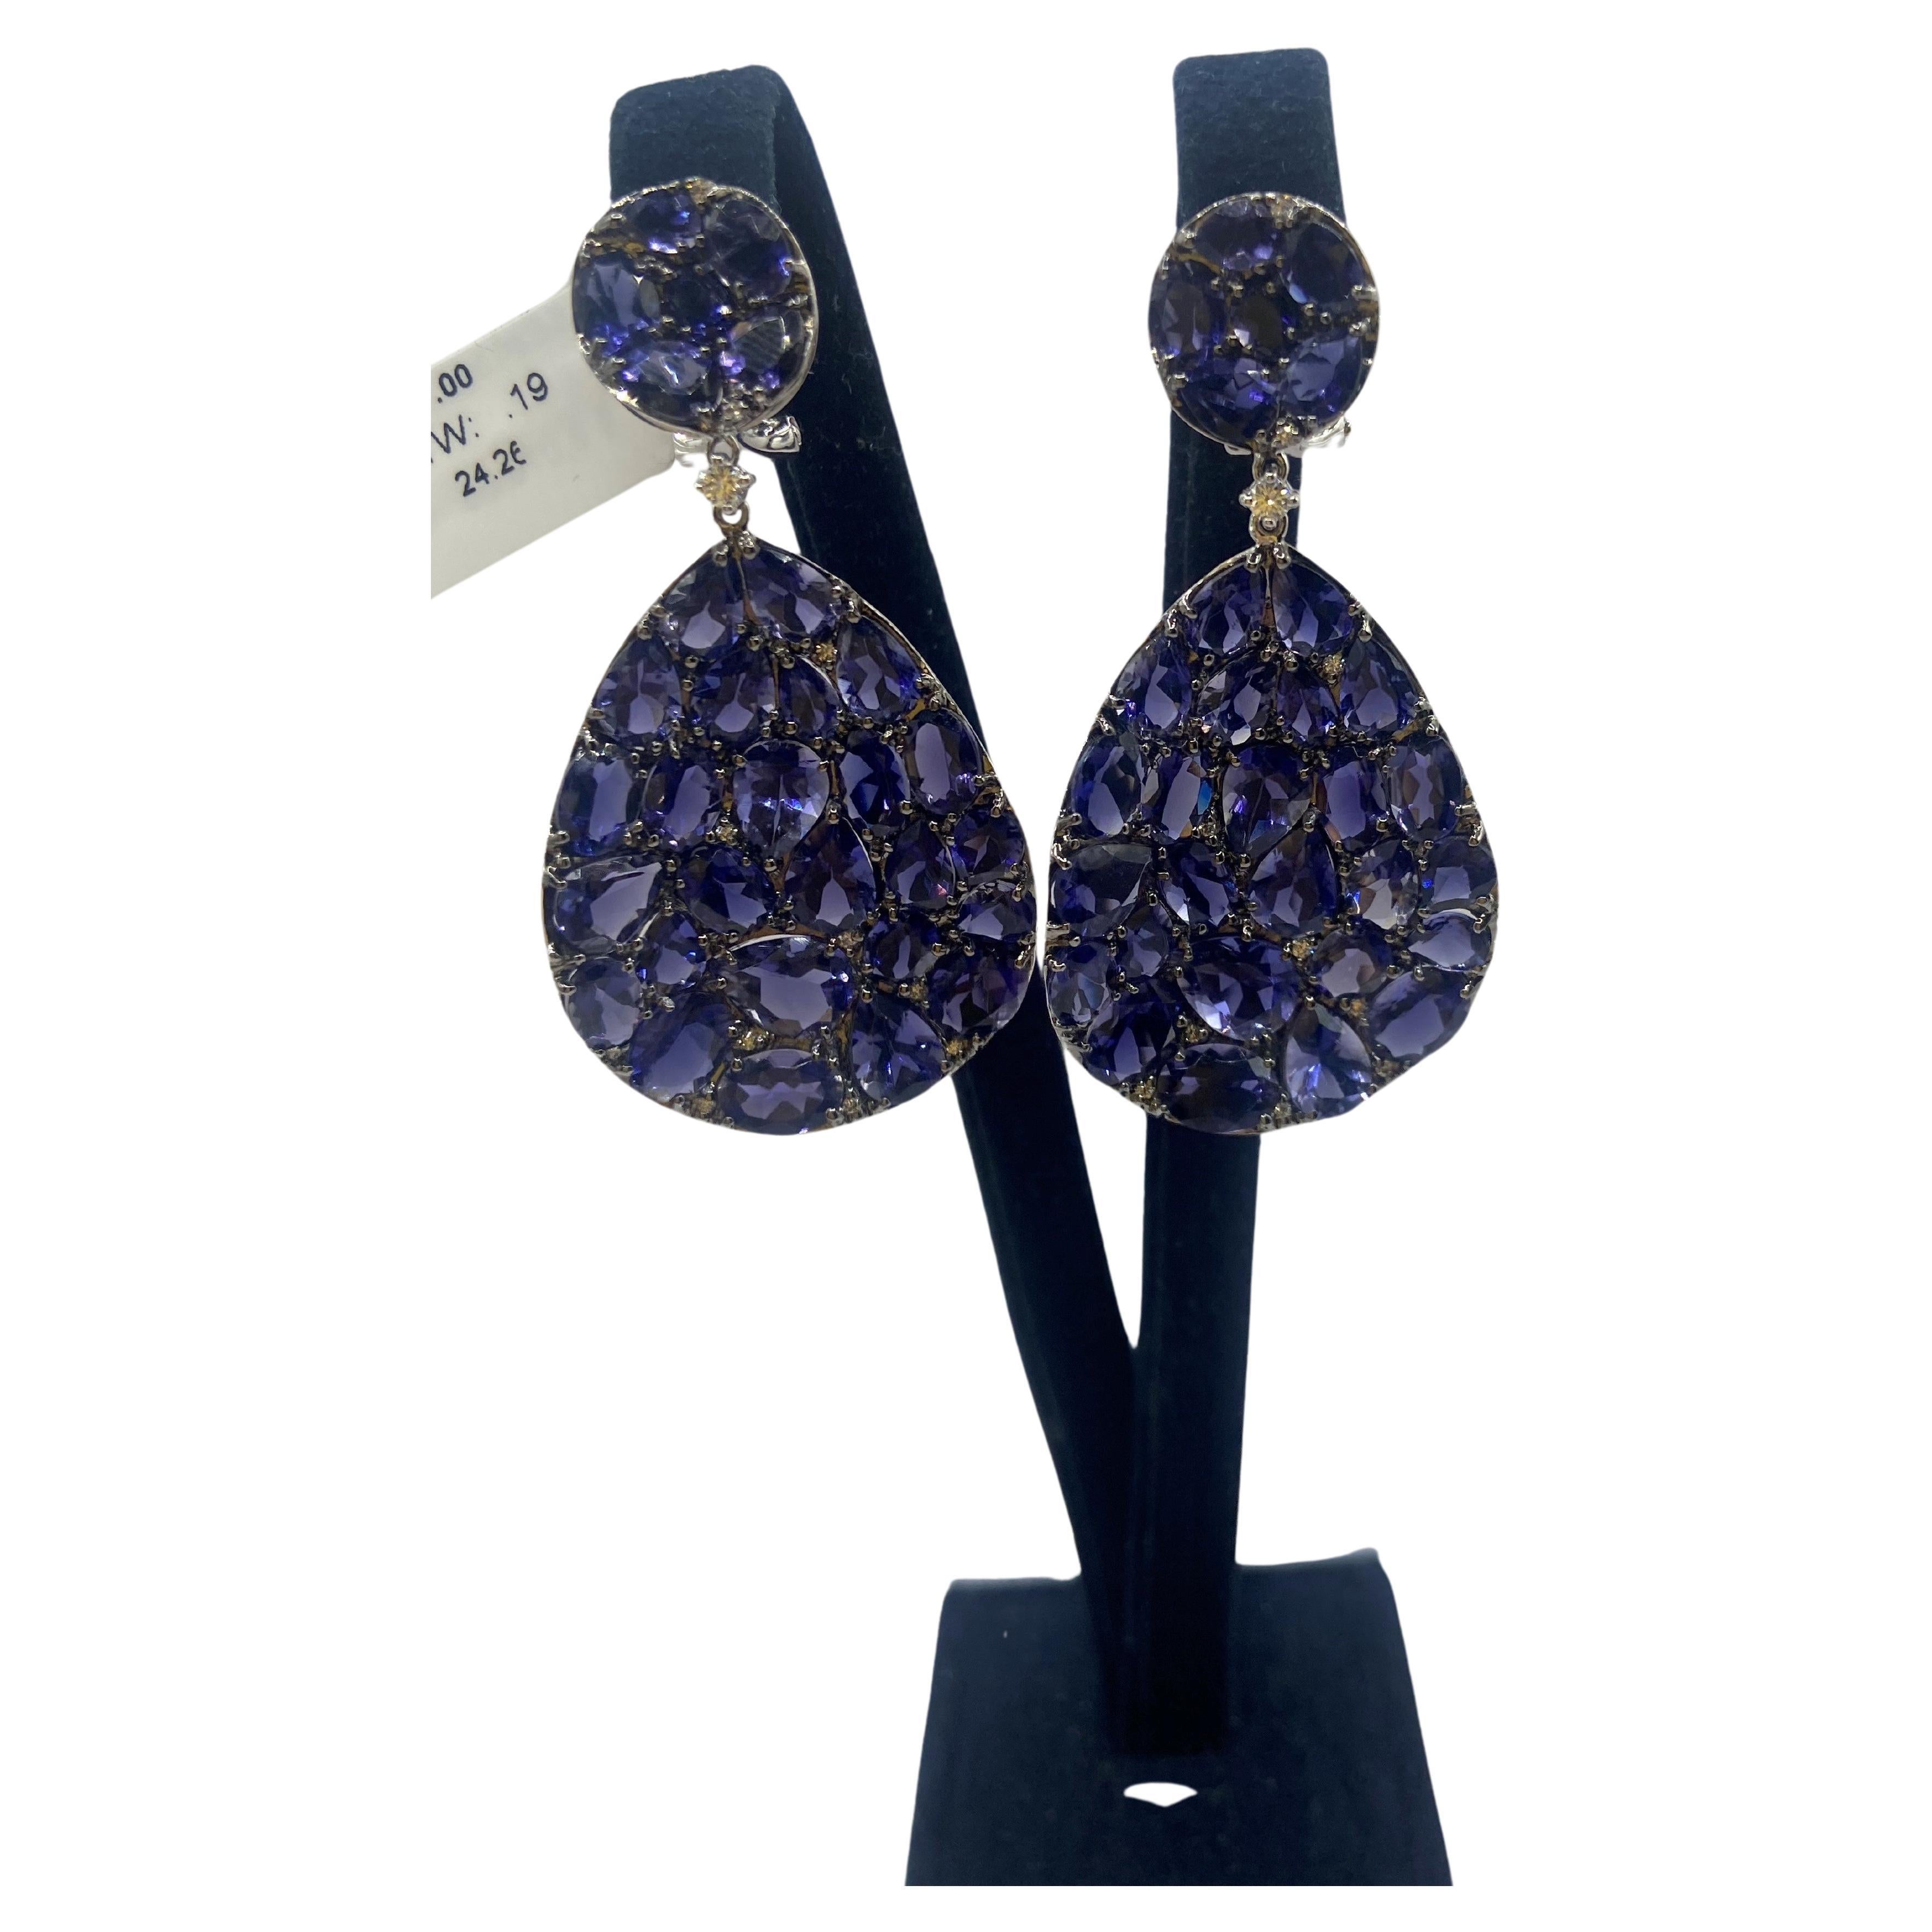 24.45ct Rose Cut Blue Iolite & Round Diamond Earrings in 18KT White Gold